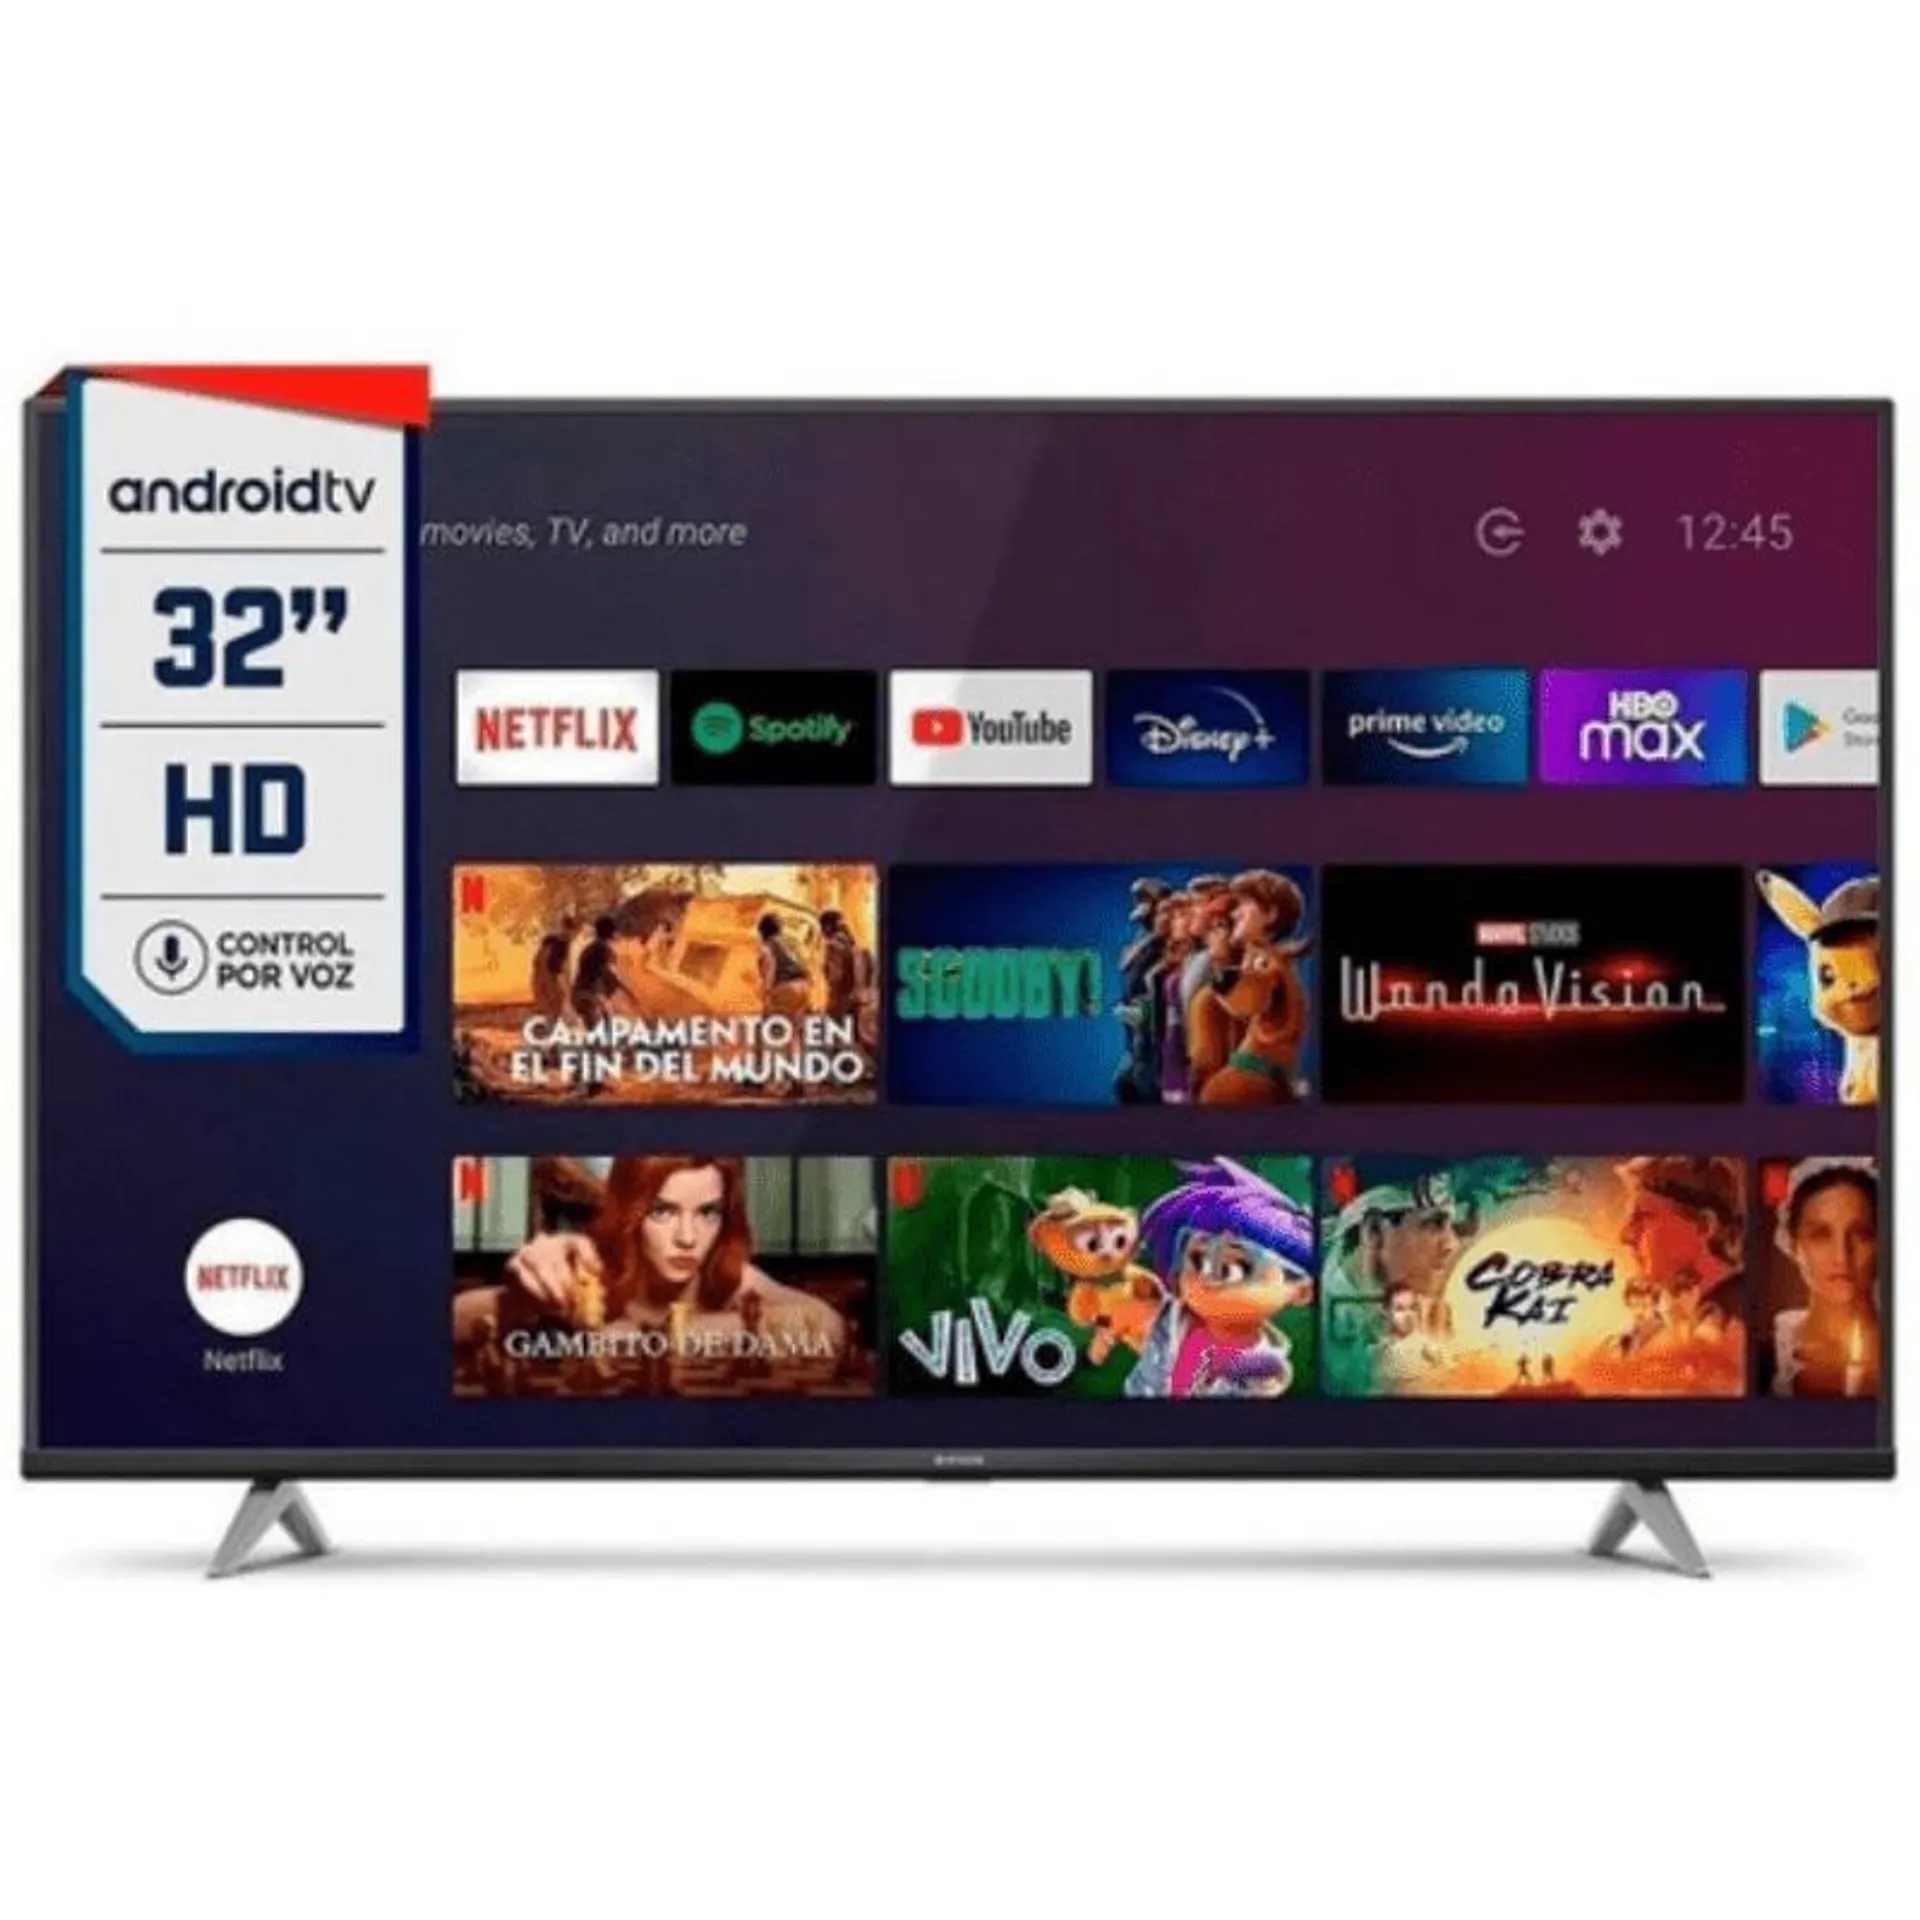 ANDROID TV 32" HD LE32SMART21